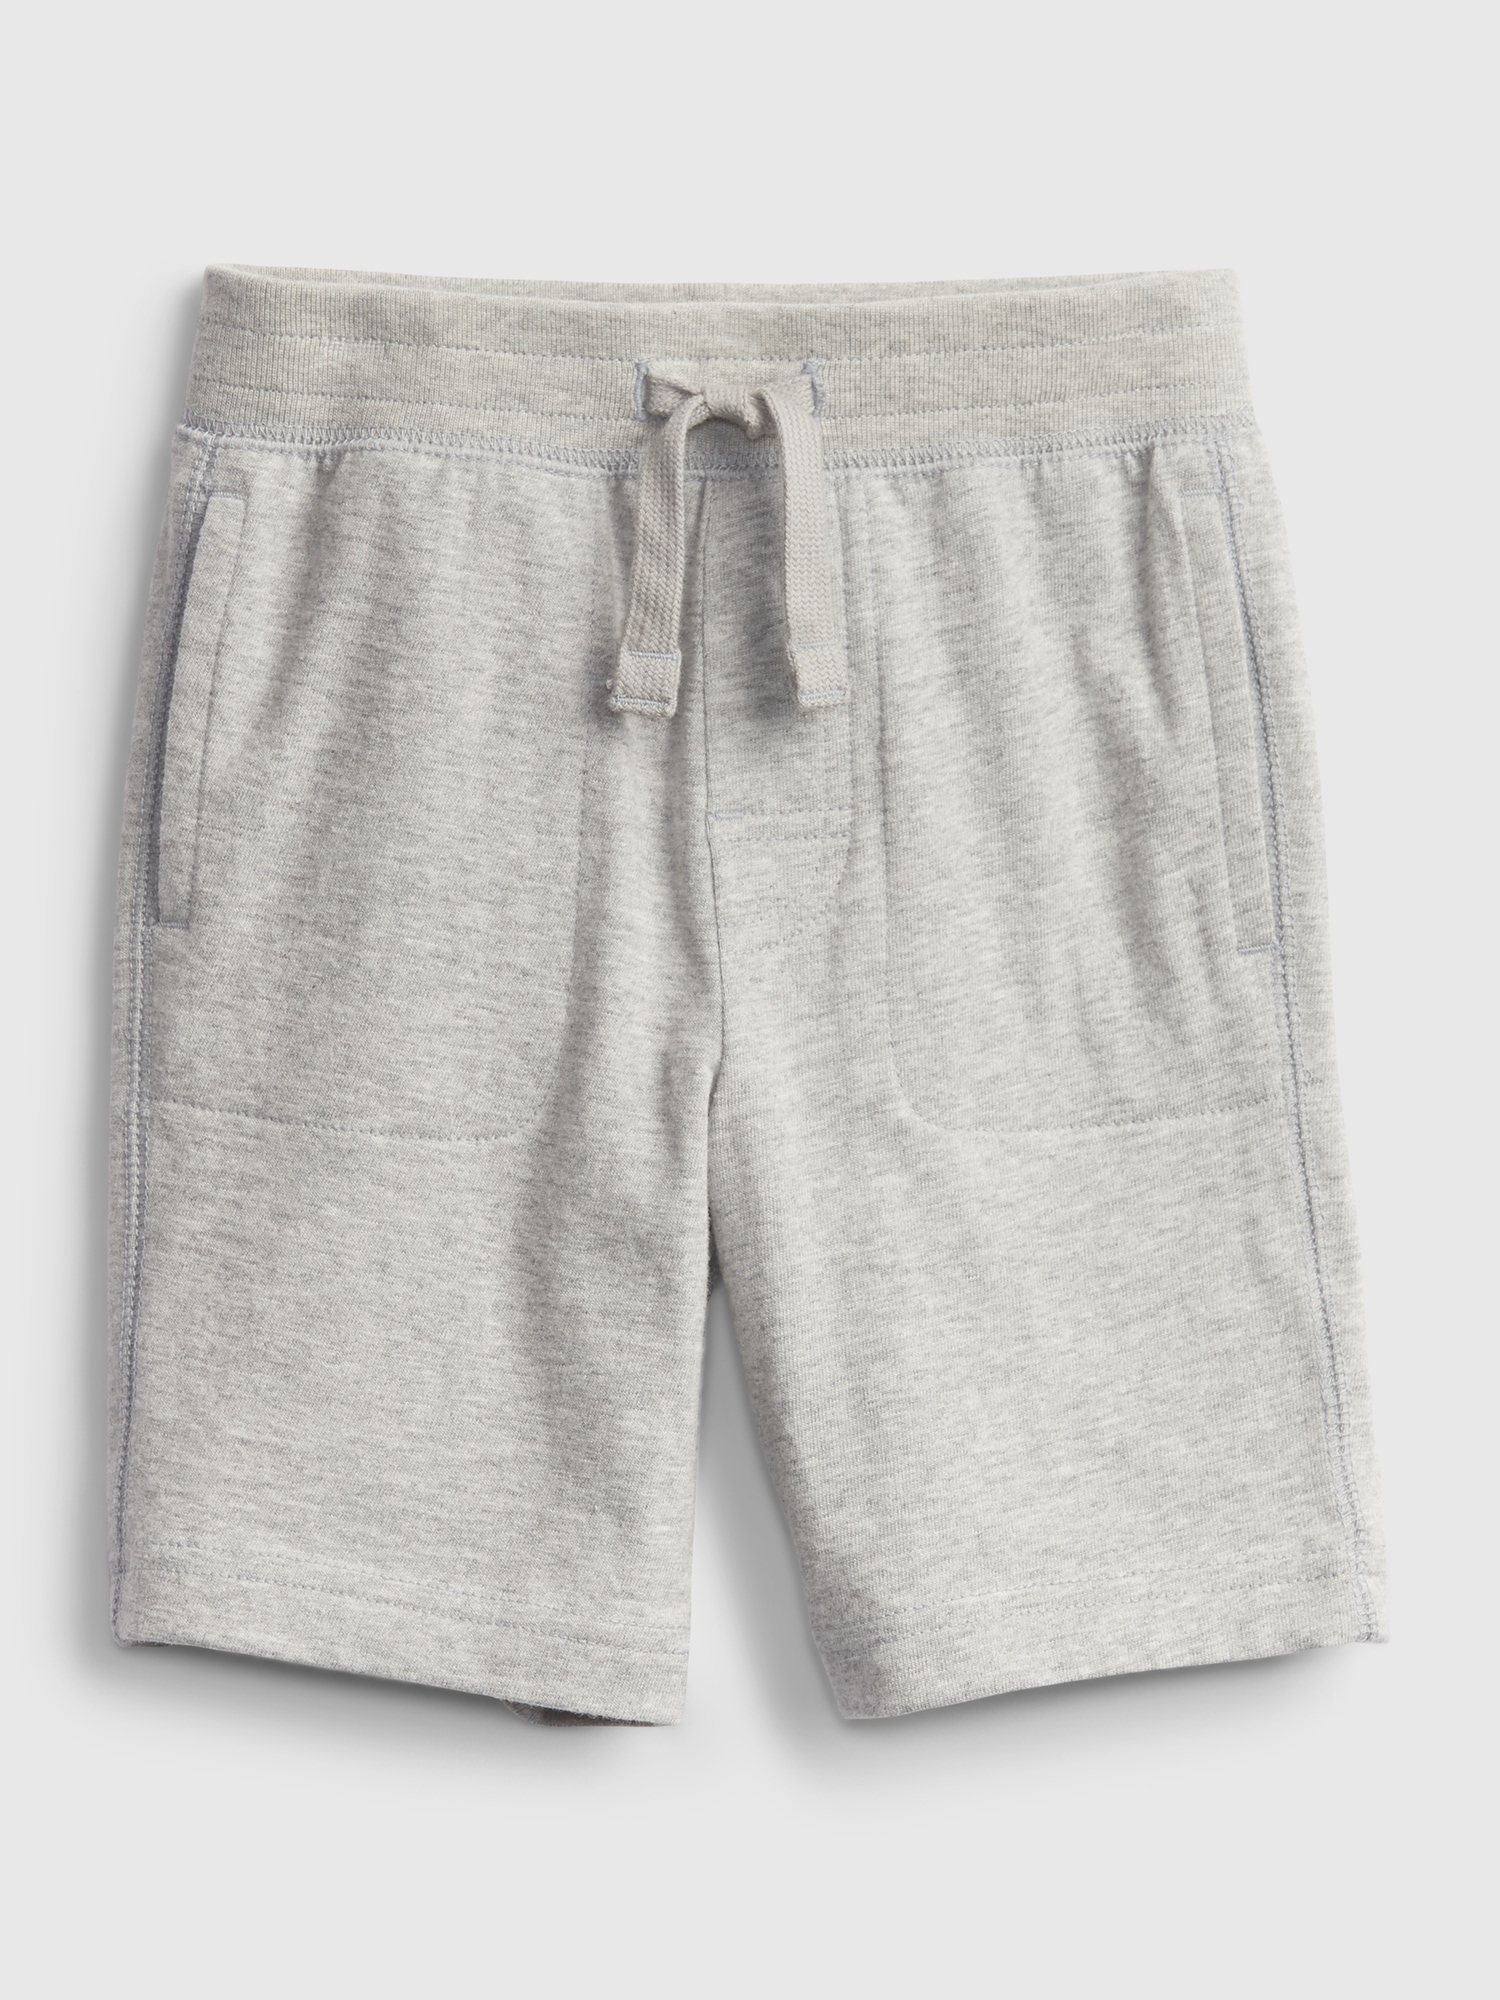 Toddler 100% Organic Cotton Mix and Match Pull-On Shorts | Gap